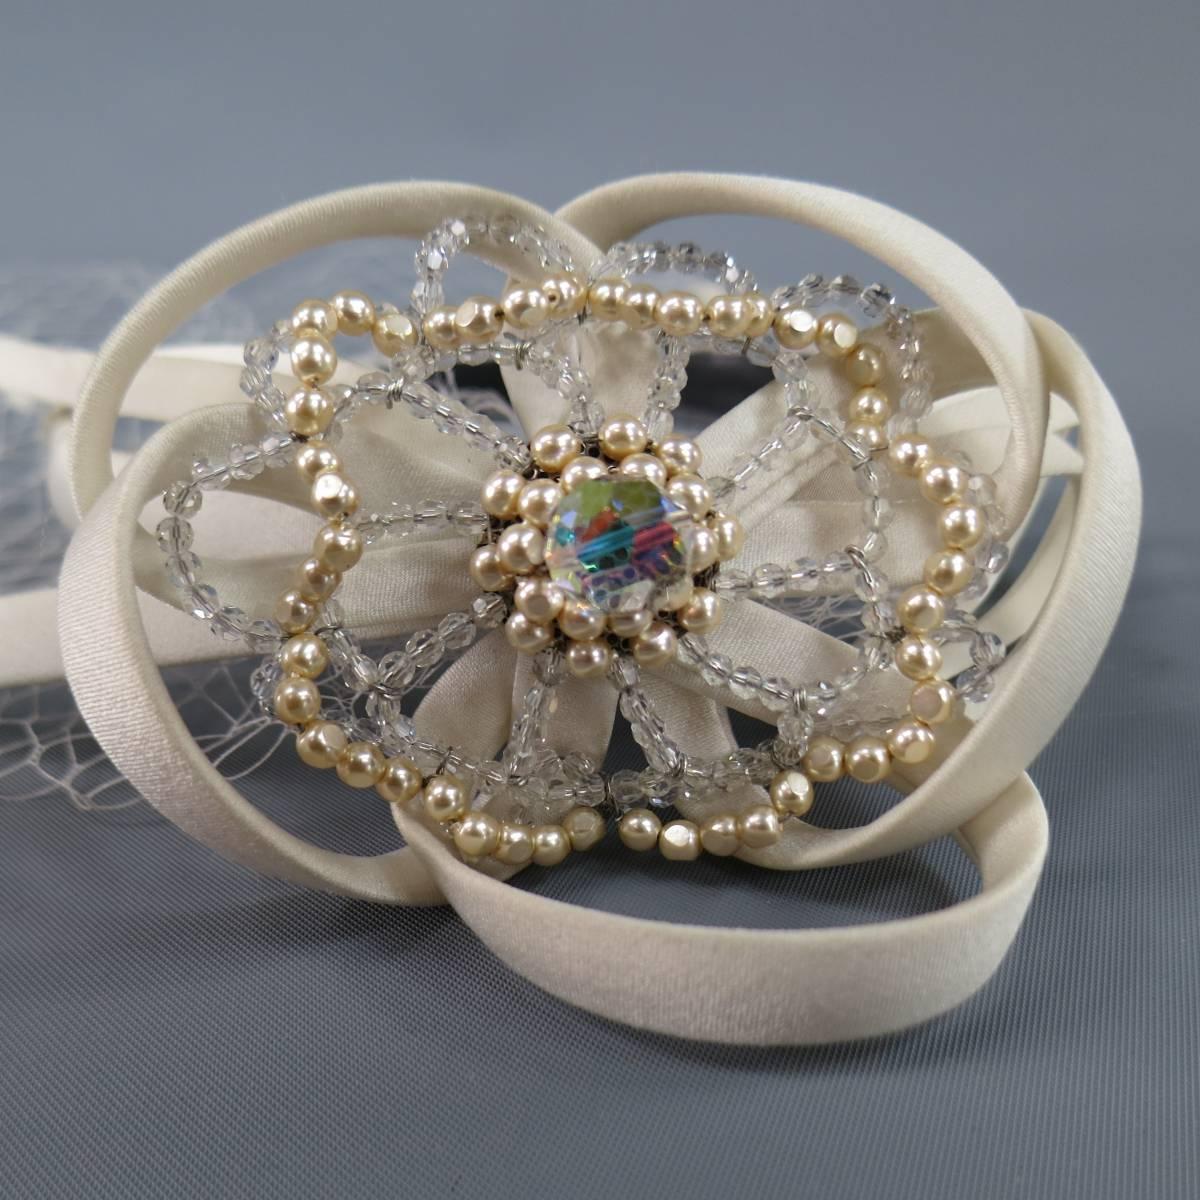 Lovely ALEXANDRE de PARIS headband in a cream silk satin with a deaded flower with satin straps and mesh vale with spots. Wear throughout. As-Is. Made in Italy.
 
Good Pre-Owned Condition.